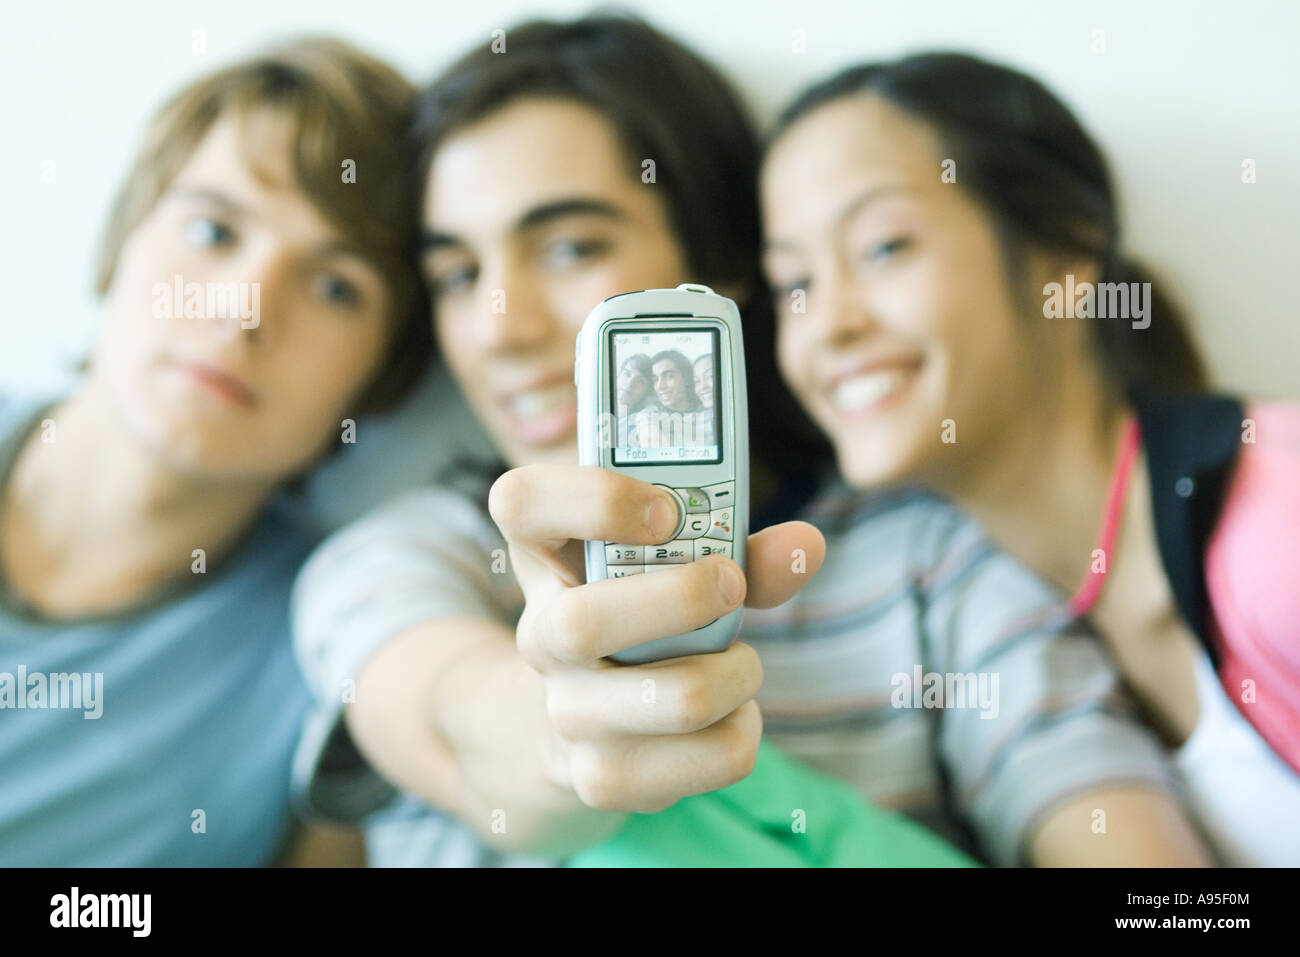 Teenage friends taking photo with cell phone, focus on phone in foreground Stock Photo